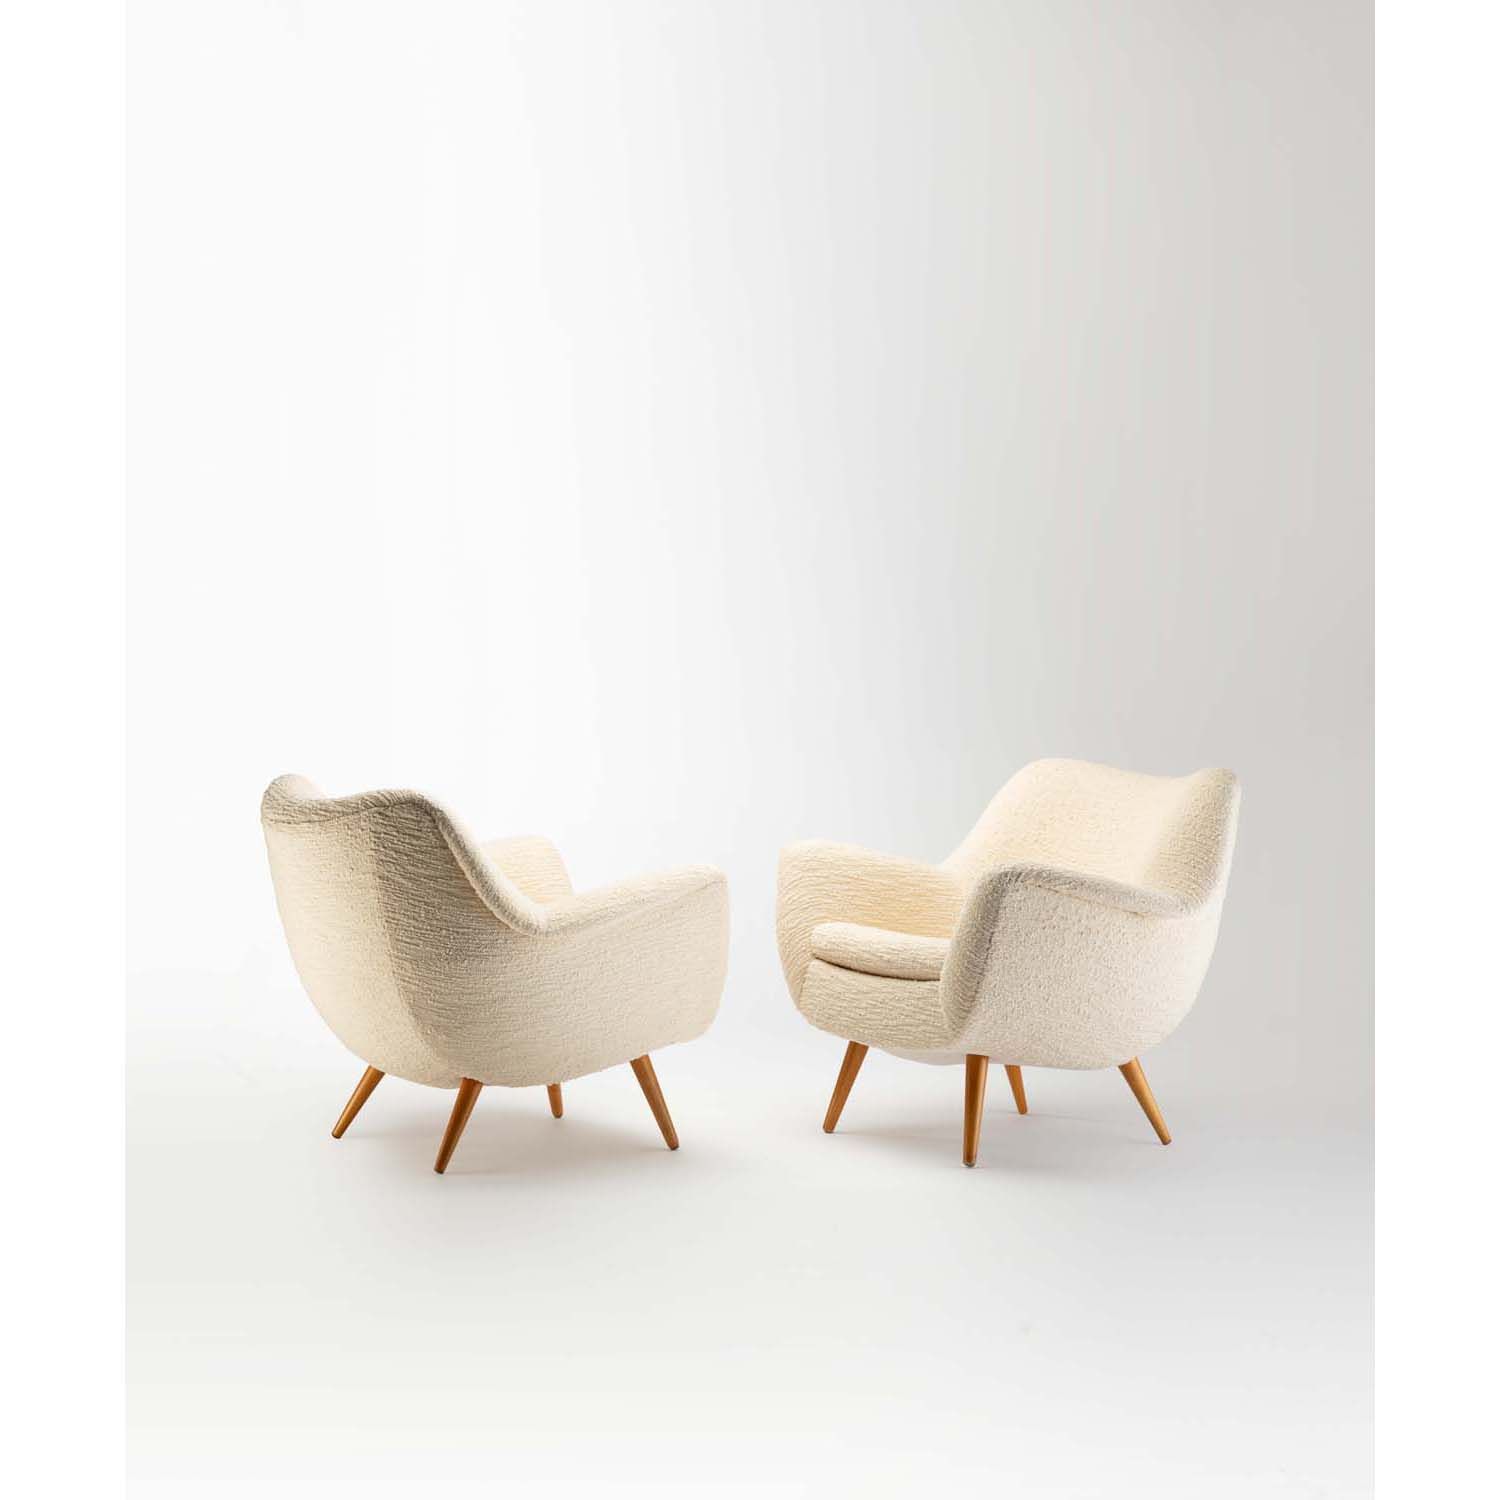 Null Lawrence Peabody (1924-2002)
Pair of armchairs
Walnut and fabric
Edited by &hellip;